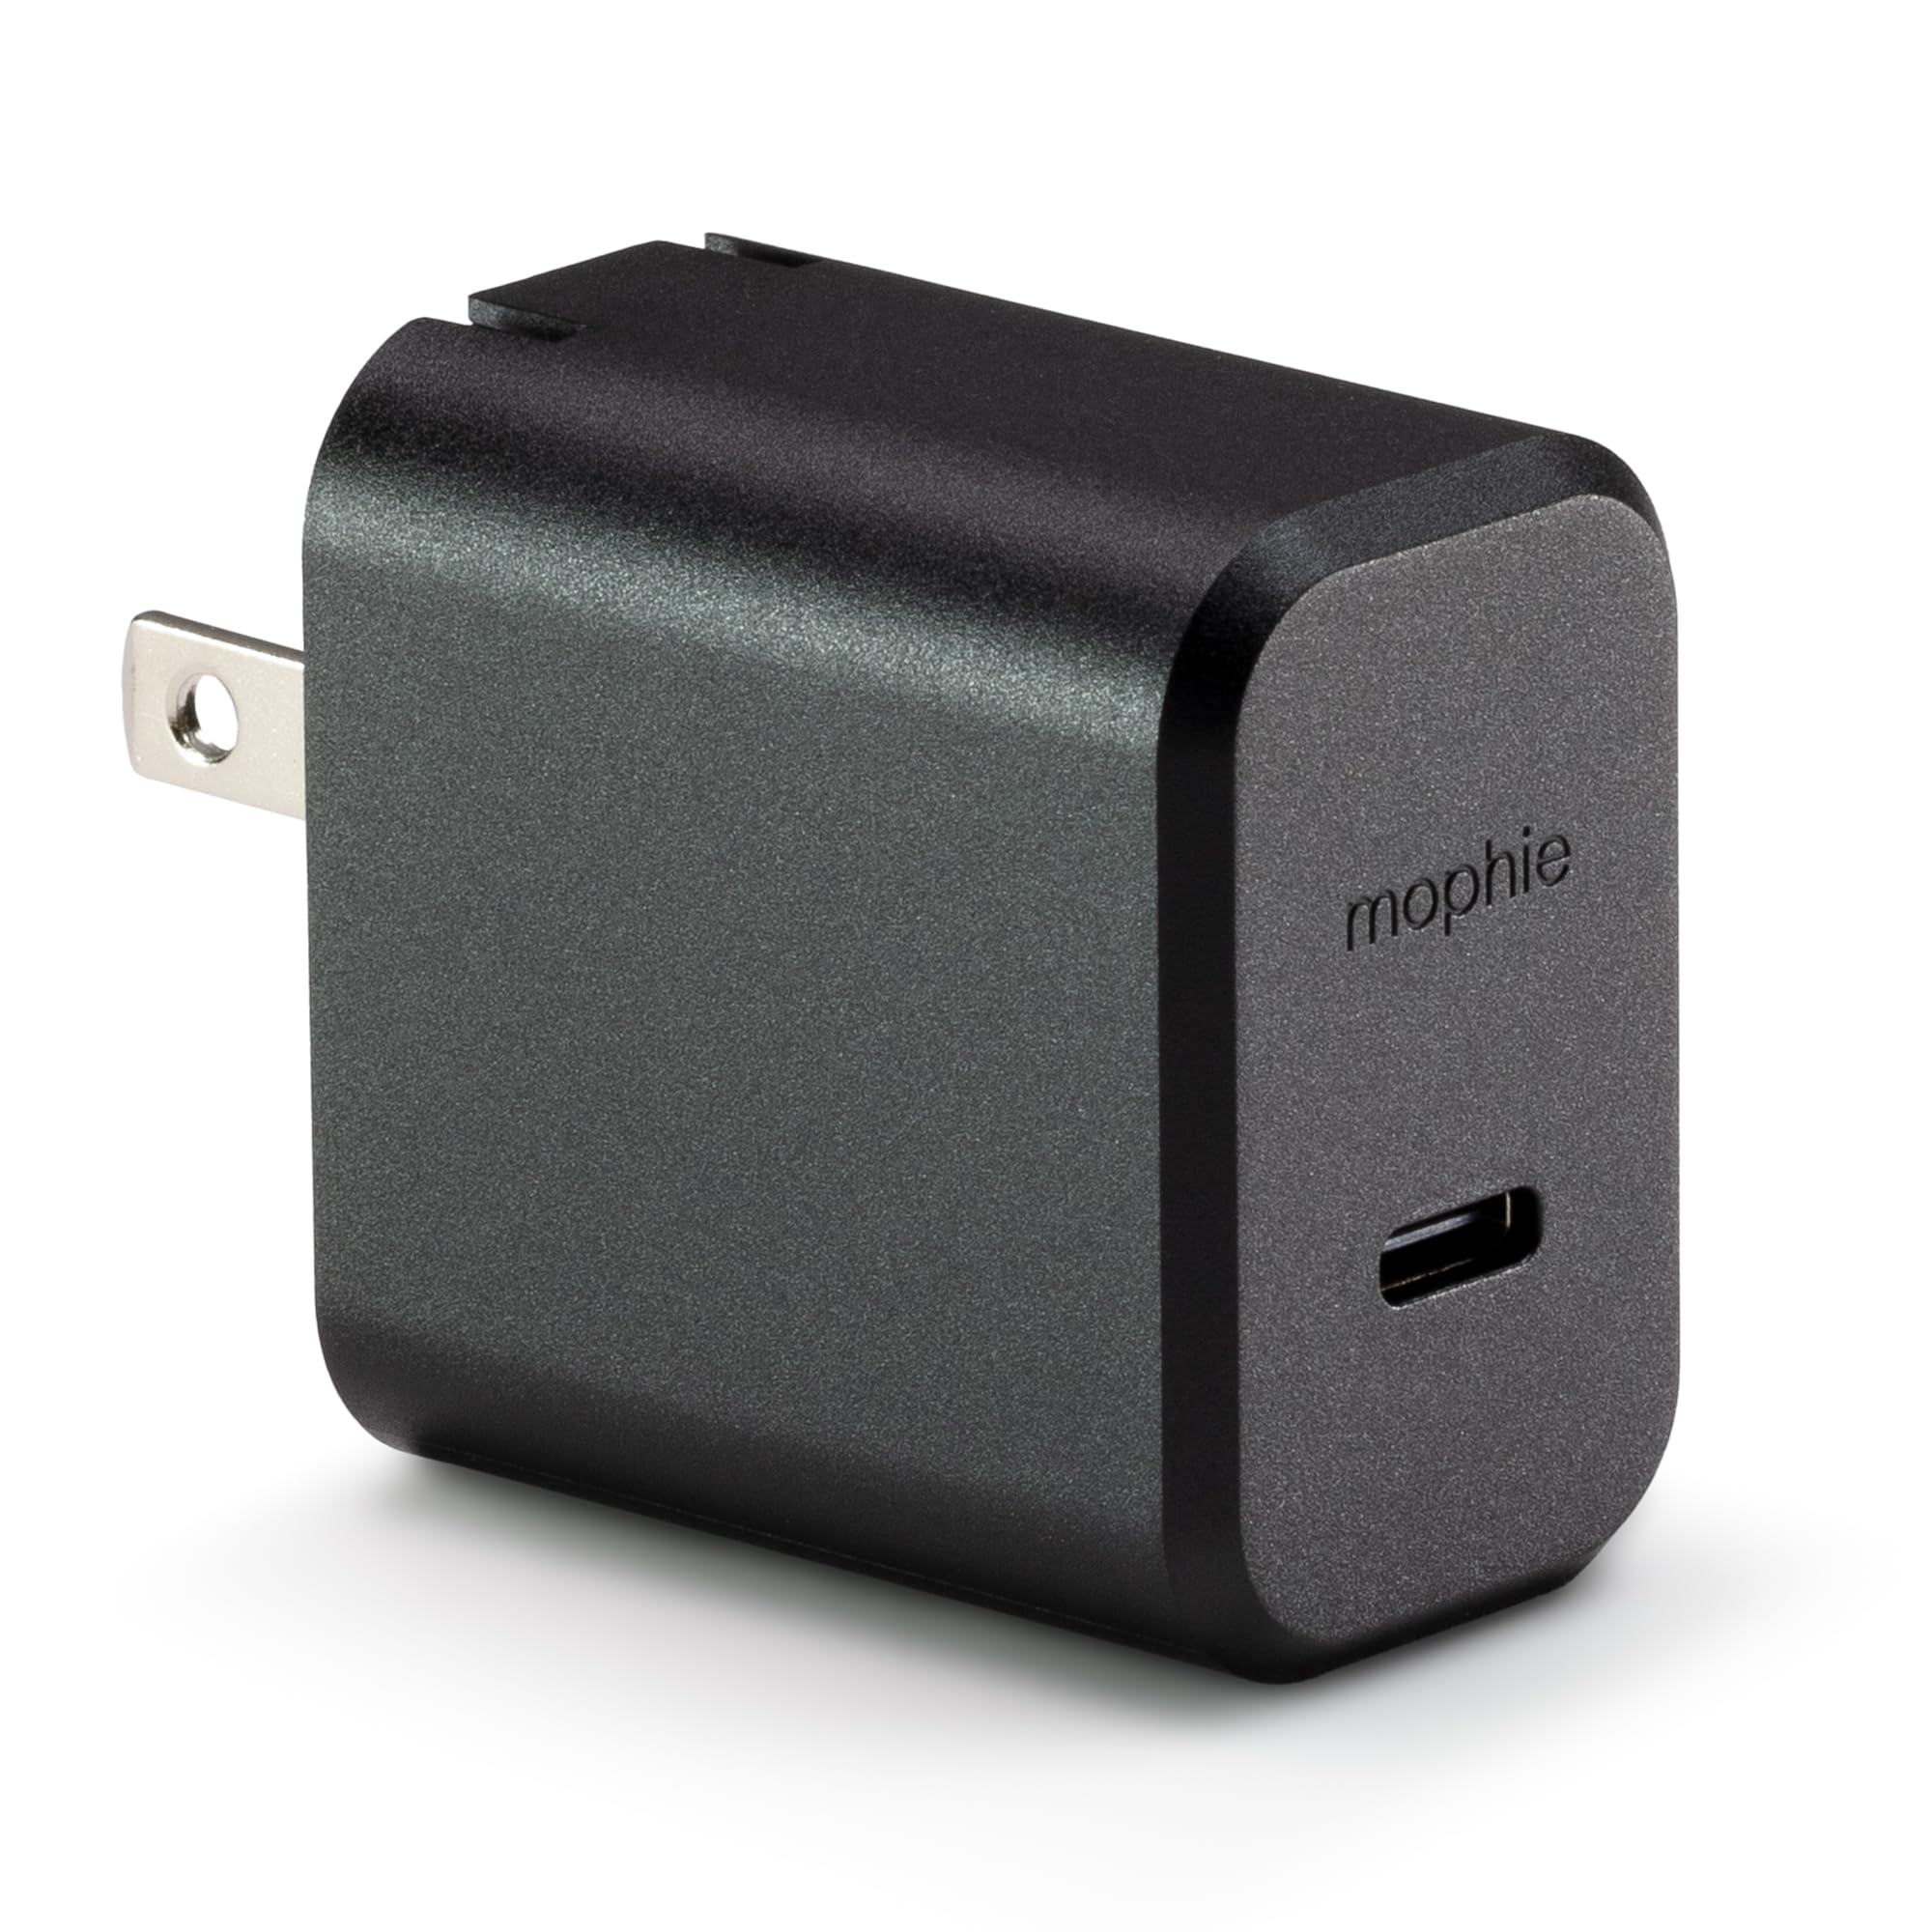 mophie GaN 30W Charger - Fast Charging 1 USB-C PD Port, with Foldable Prongs, Ultra-Compact Design for Phones, Tablets, Laptops, Made with Recycled Materials, Black